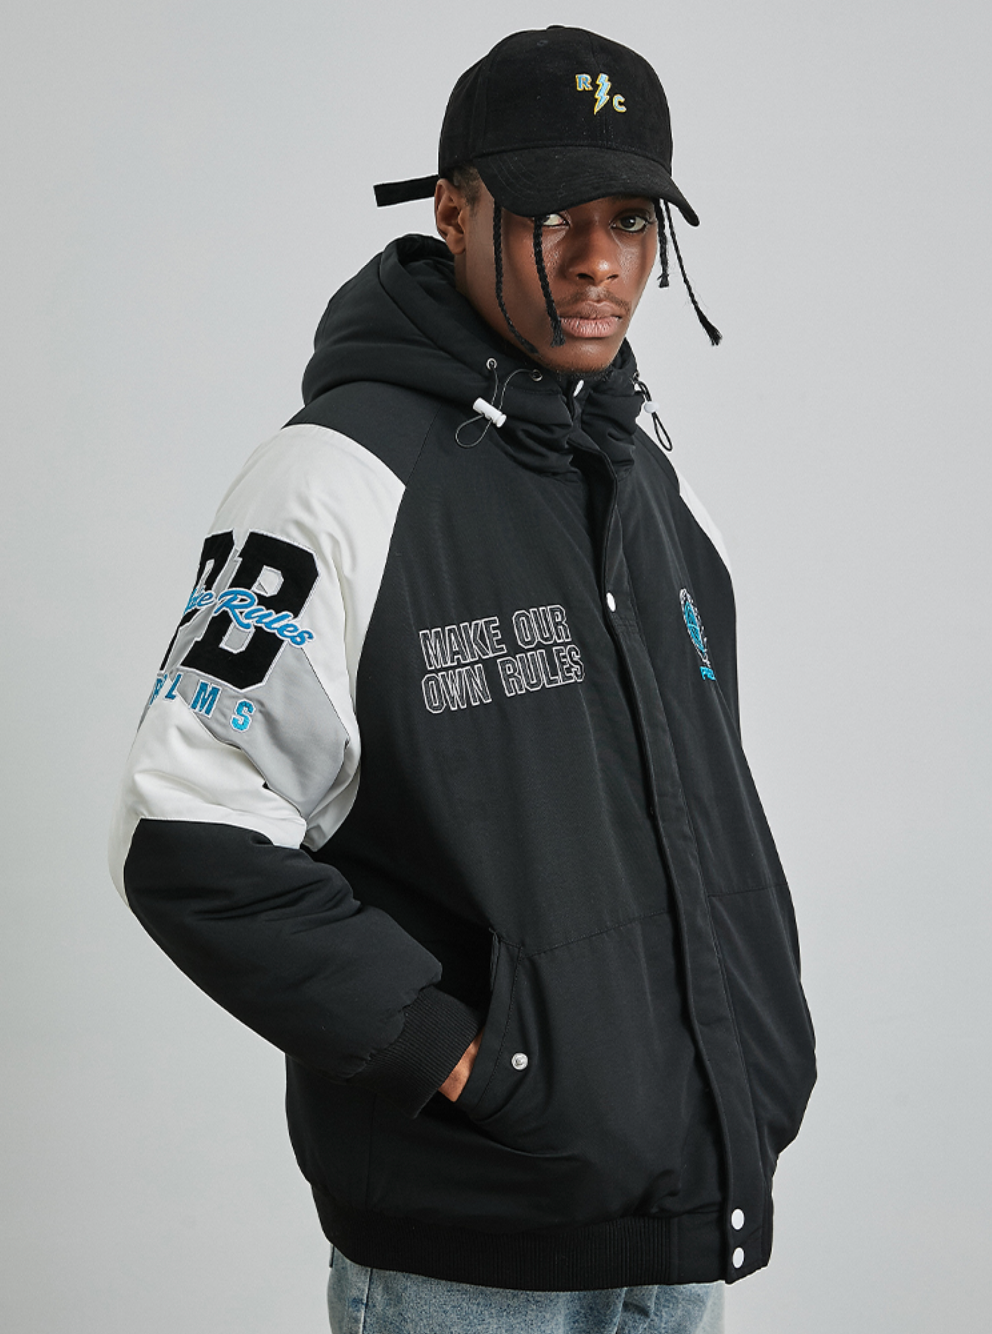 PRBLMS LOGO Embroidered Hooded Jacket